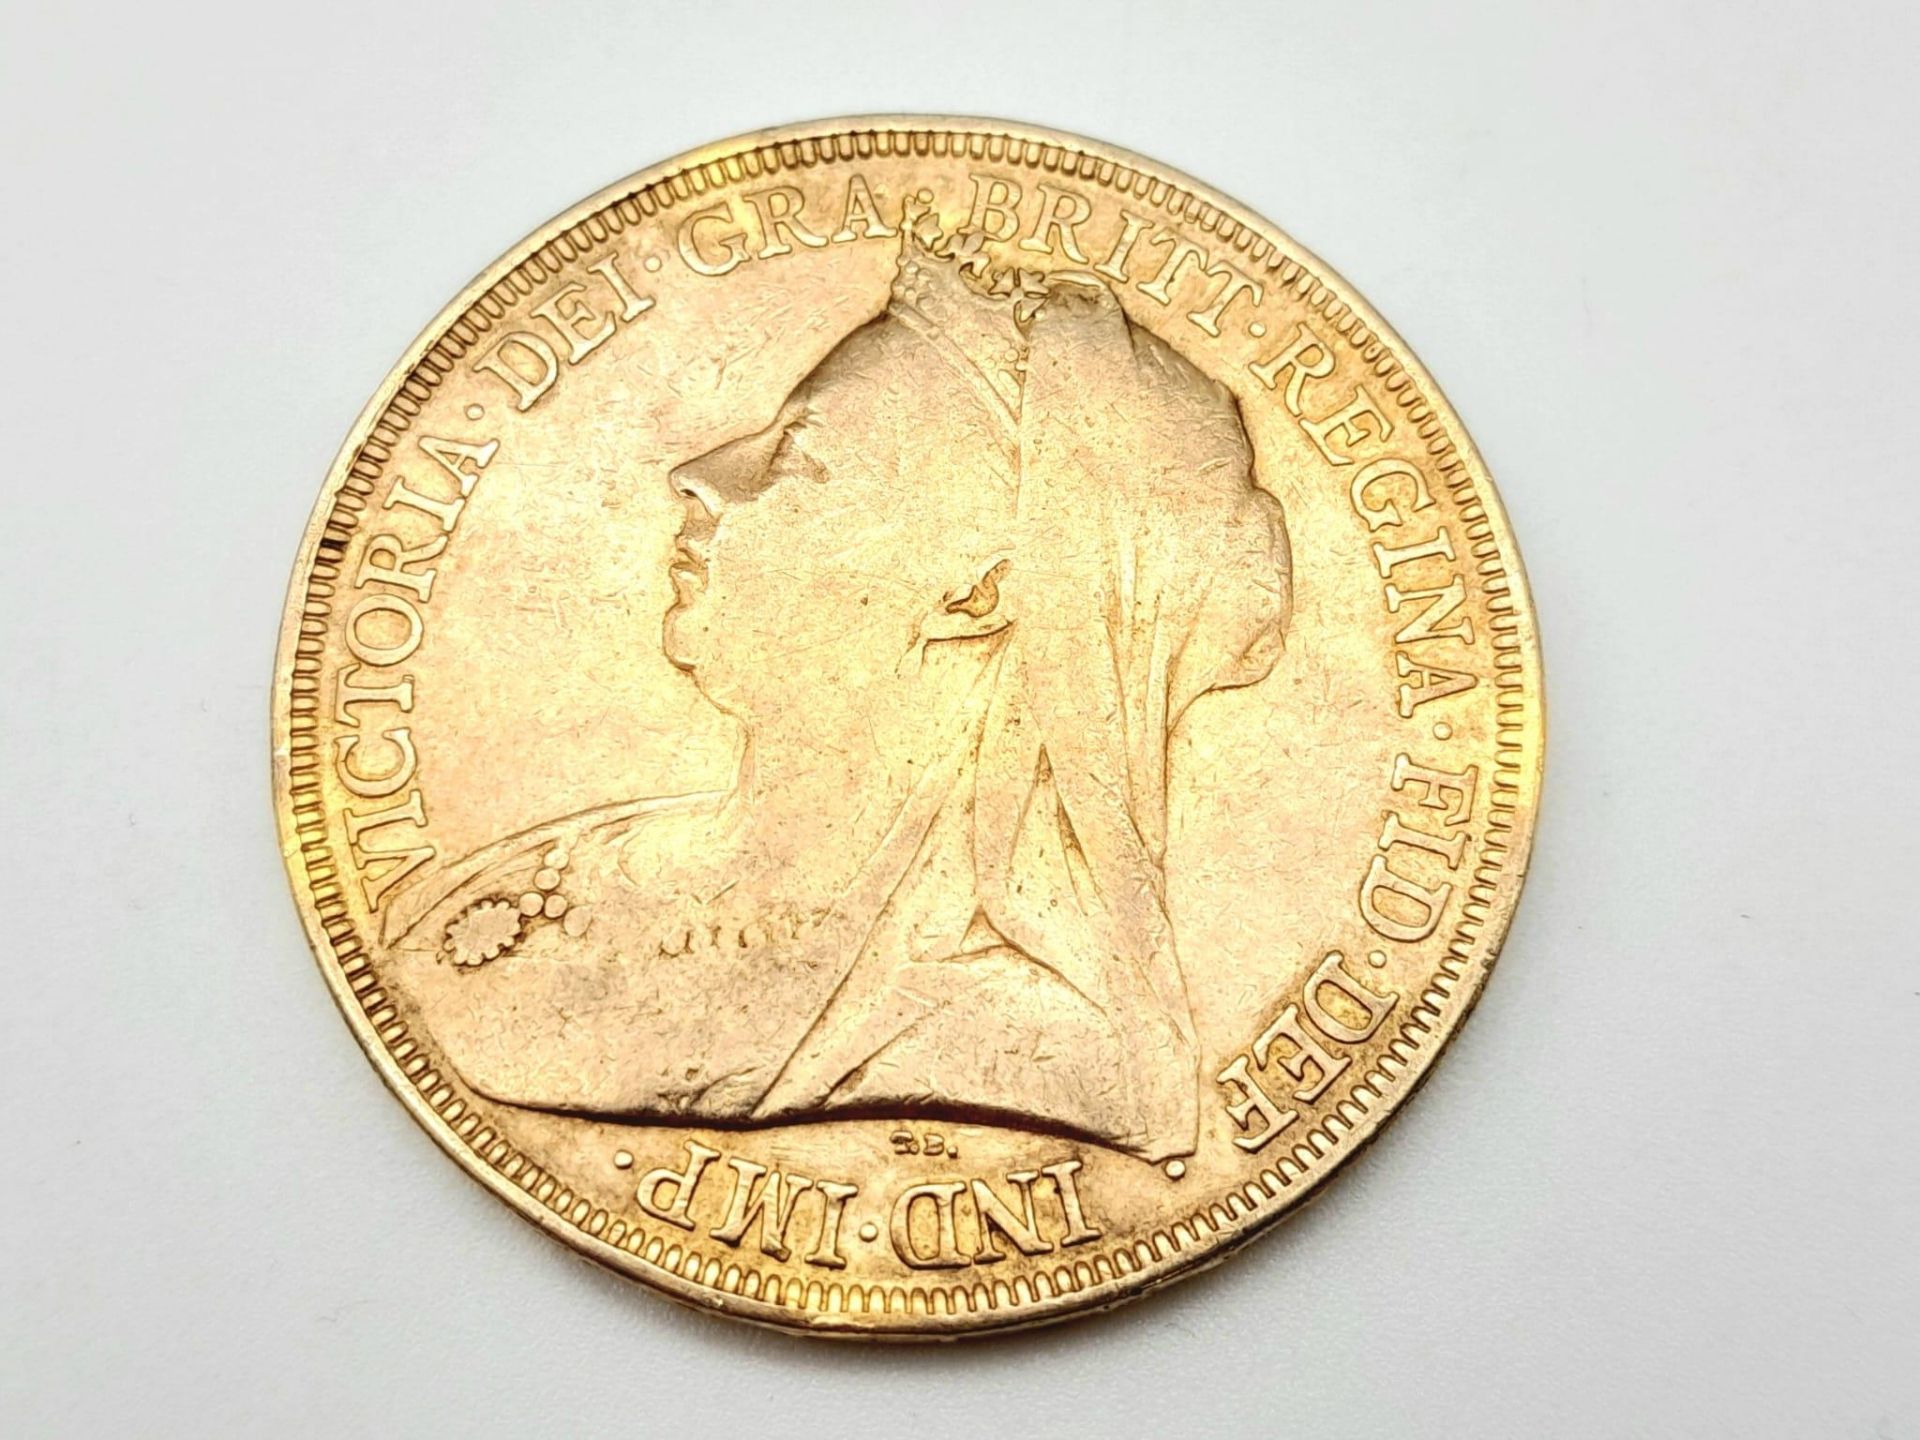 SILVER WITH GOLD TONE FINISH 1897 QUEEN VICTORIA COIN 28G - Image 2 of 2